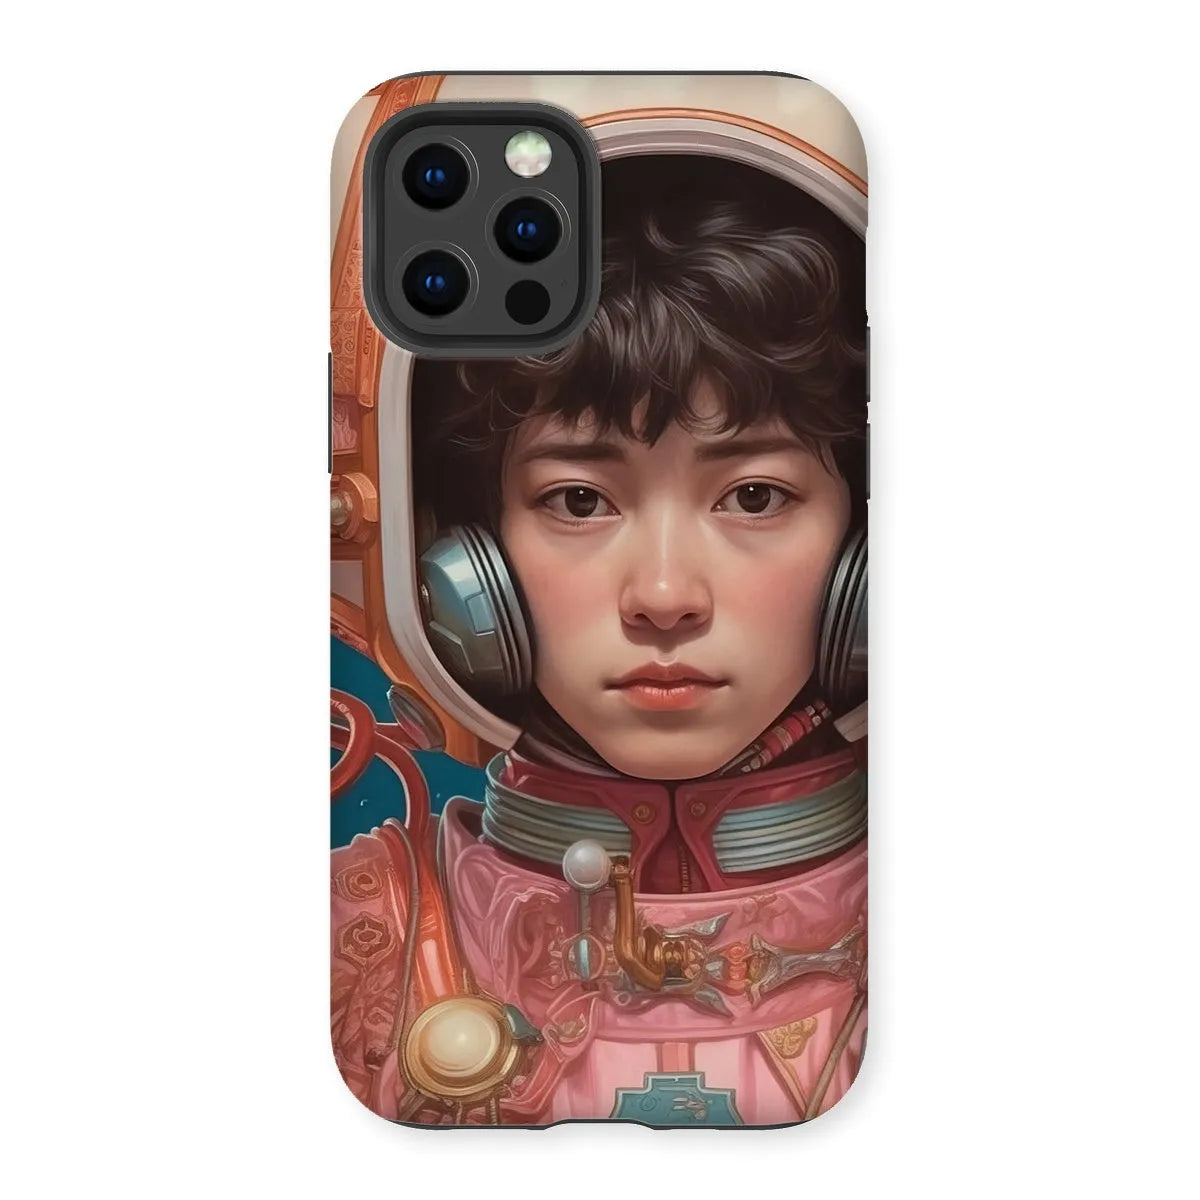 Kaito The Gay Astronaut - Lgbtq Art Phone Case - Iphone 12 Pro / Matte - Mobile Phone Cases - Aesthetic Art